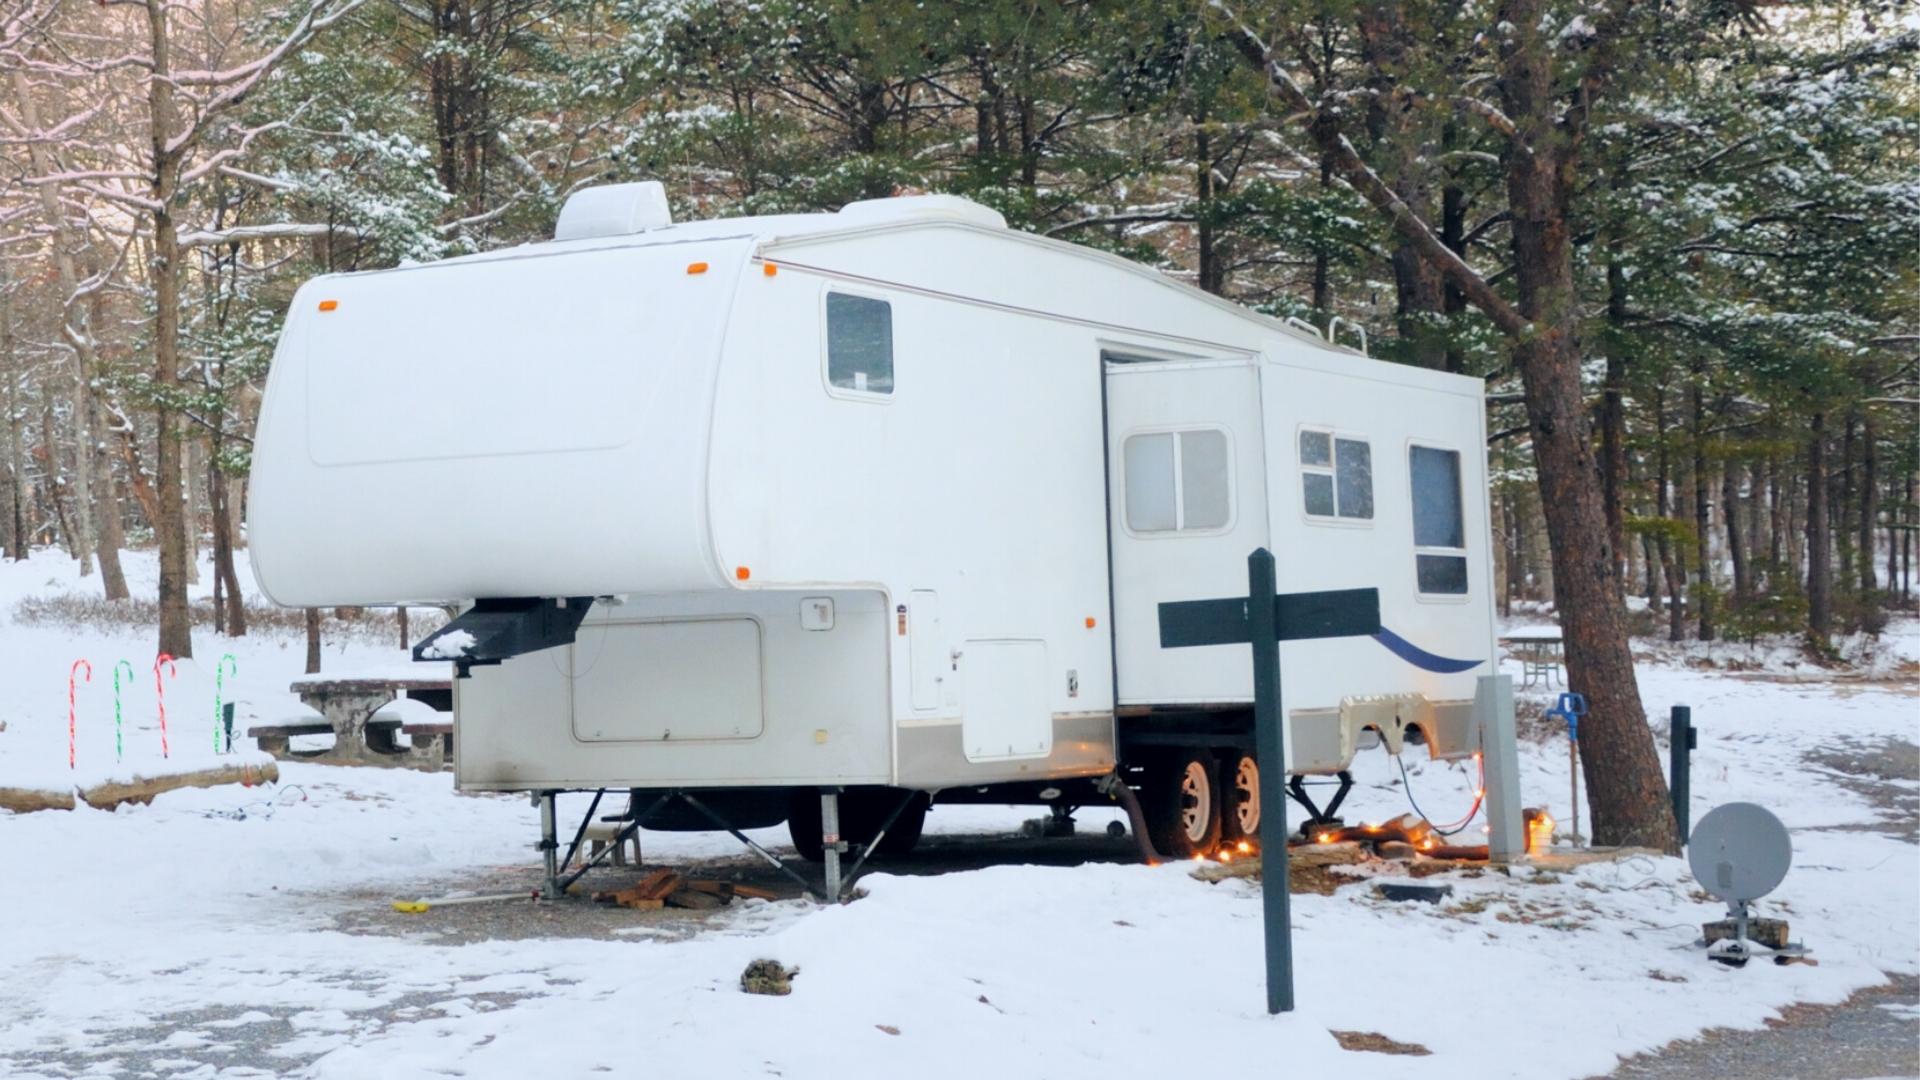 Stay warm with our 15 tips for winter RV living.